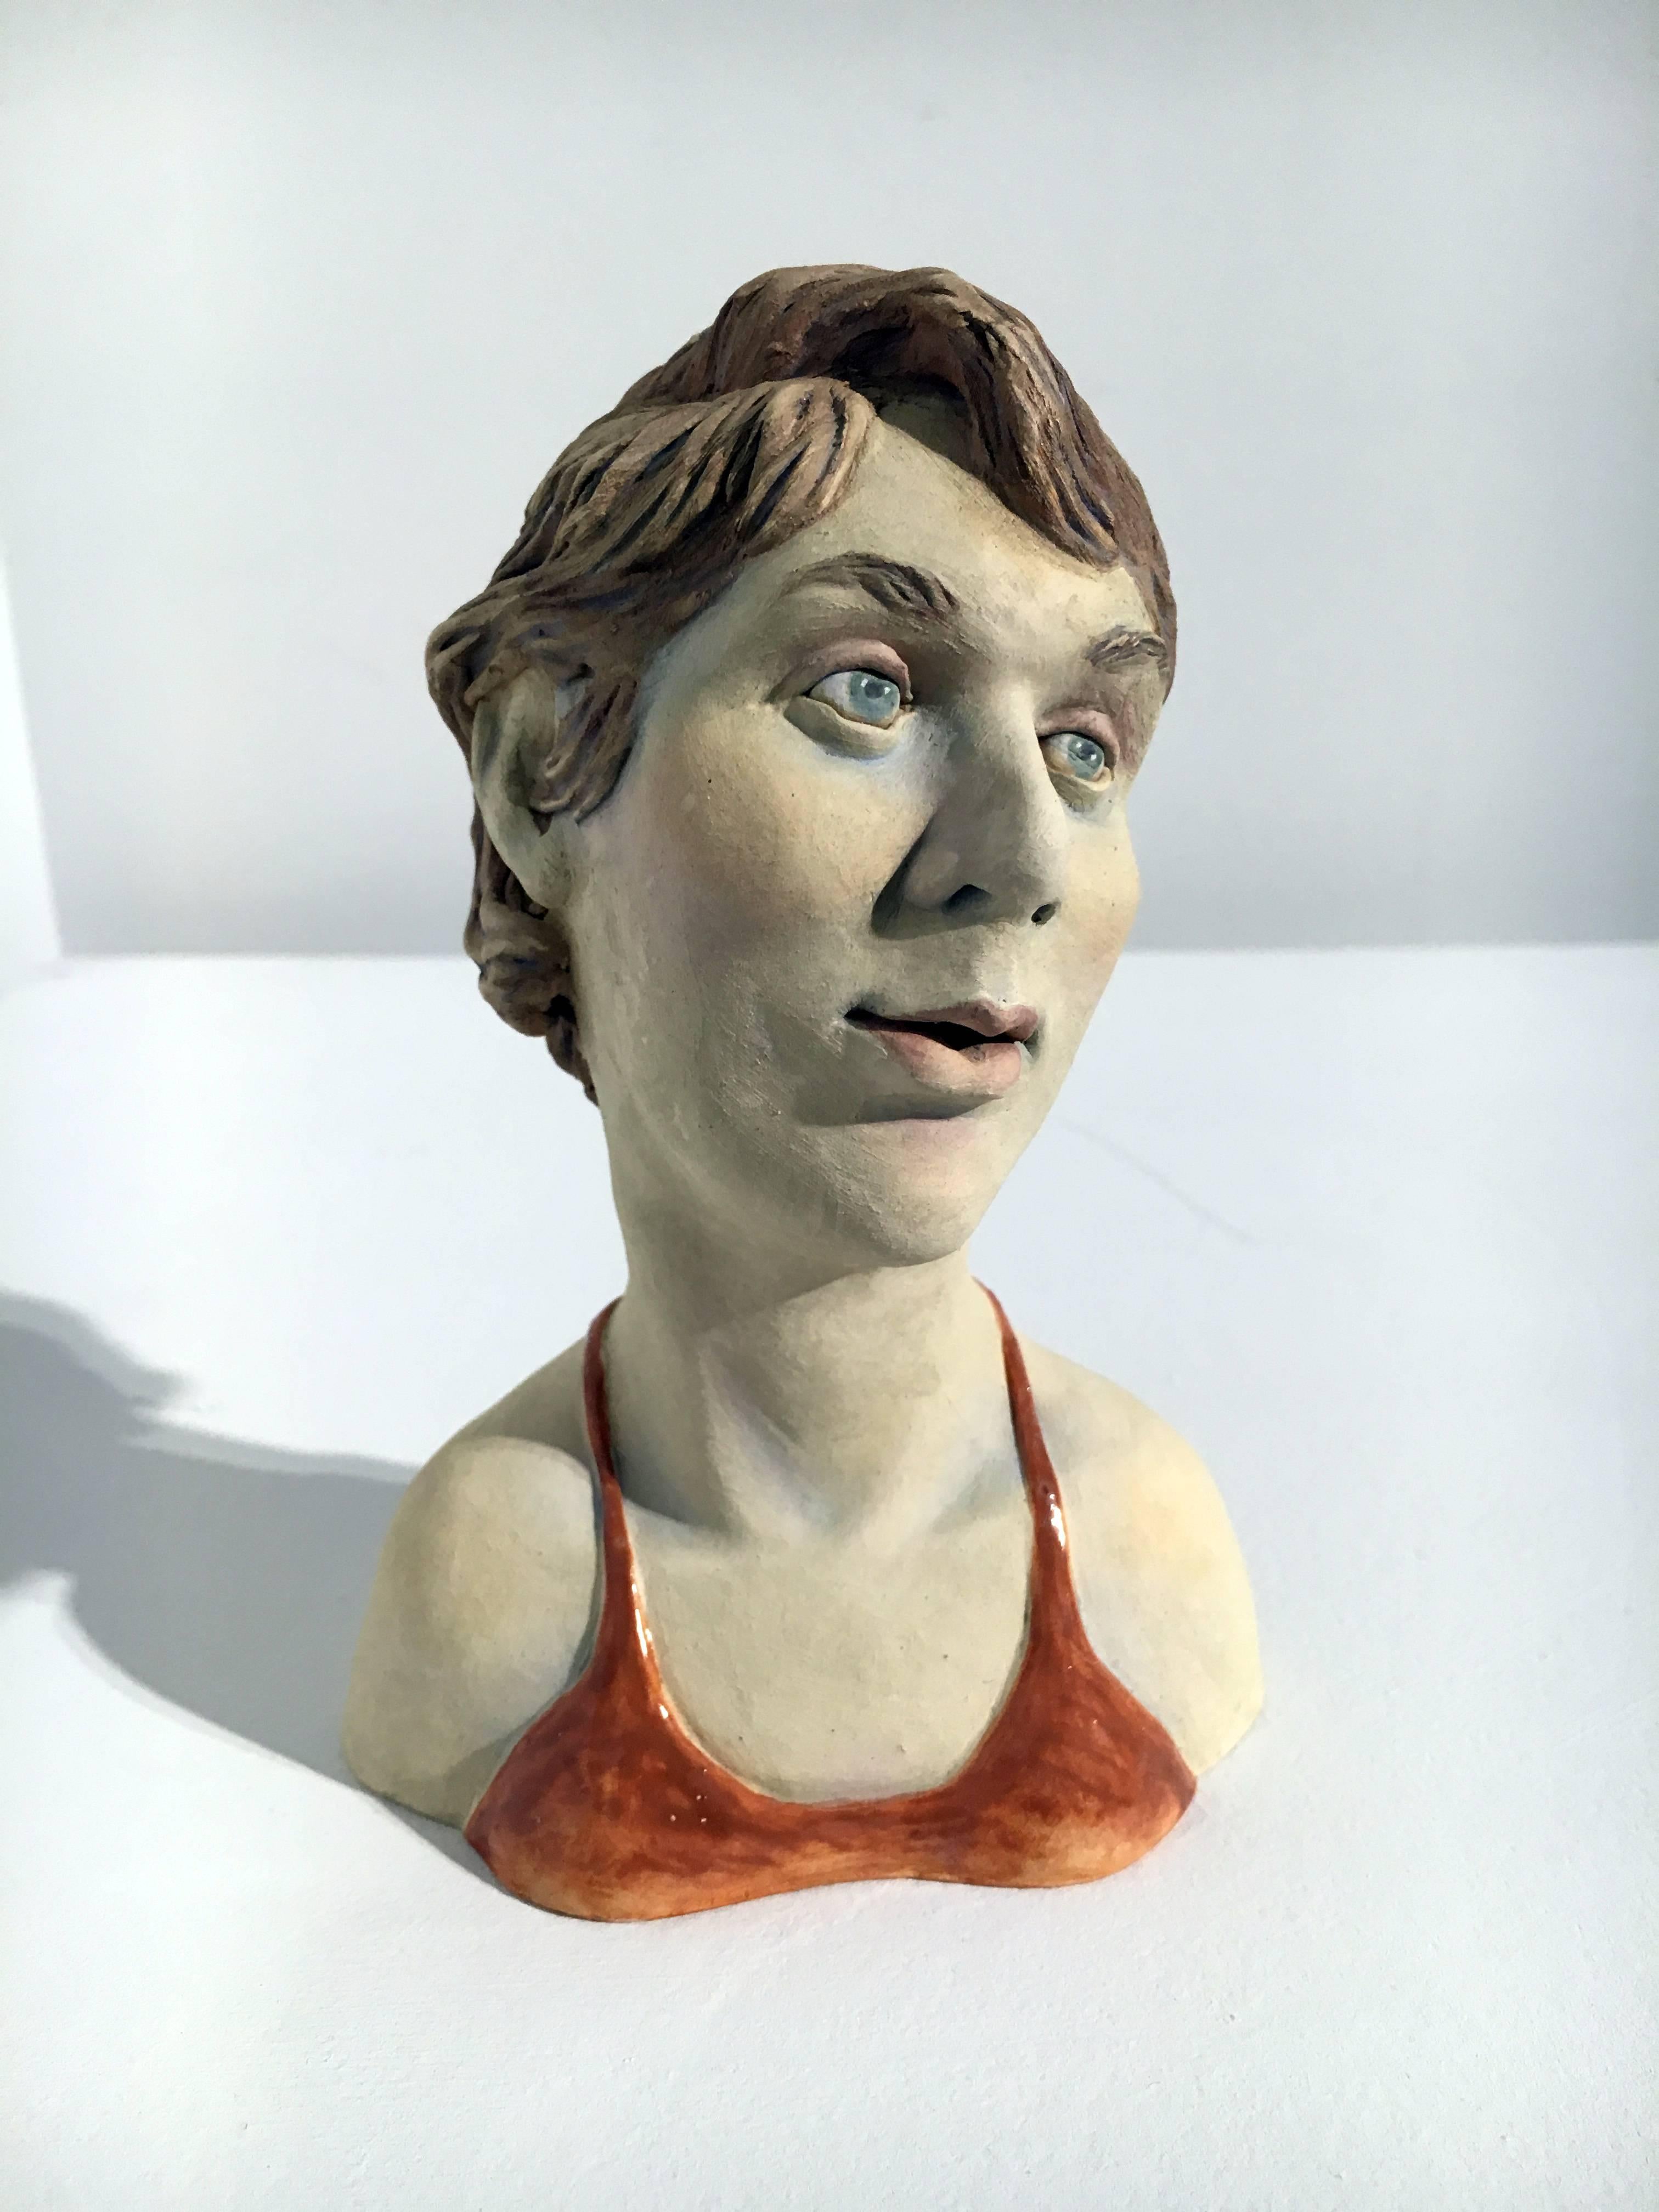 Beverly Mayeri is a studio artist living in the Bay Area with over 30 years experience as an established ceramic sculptor. She earned a BA from the University of California, Berkeley, and an MA in sculpture at San Francisco State University. Mayeri